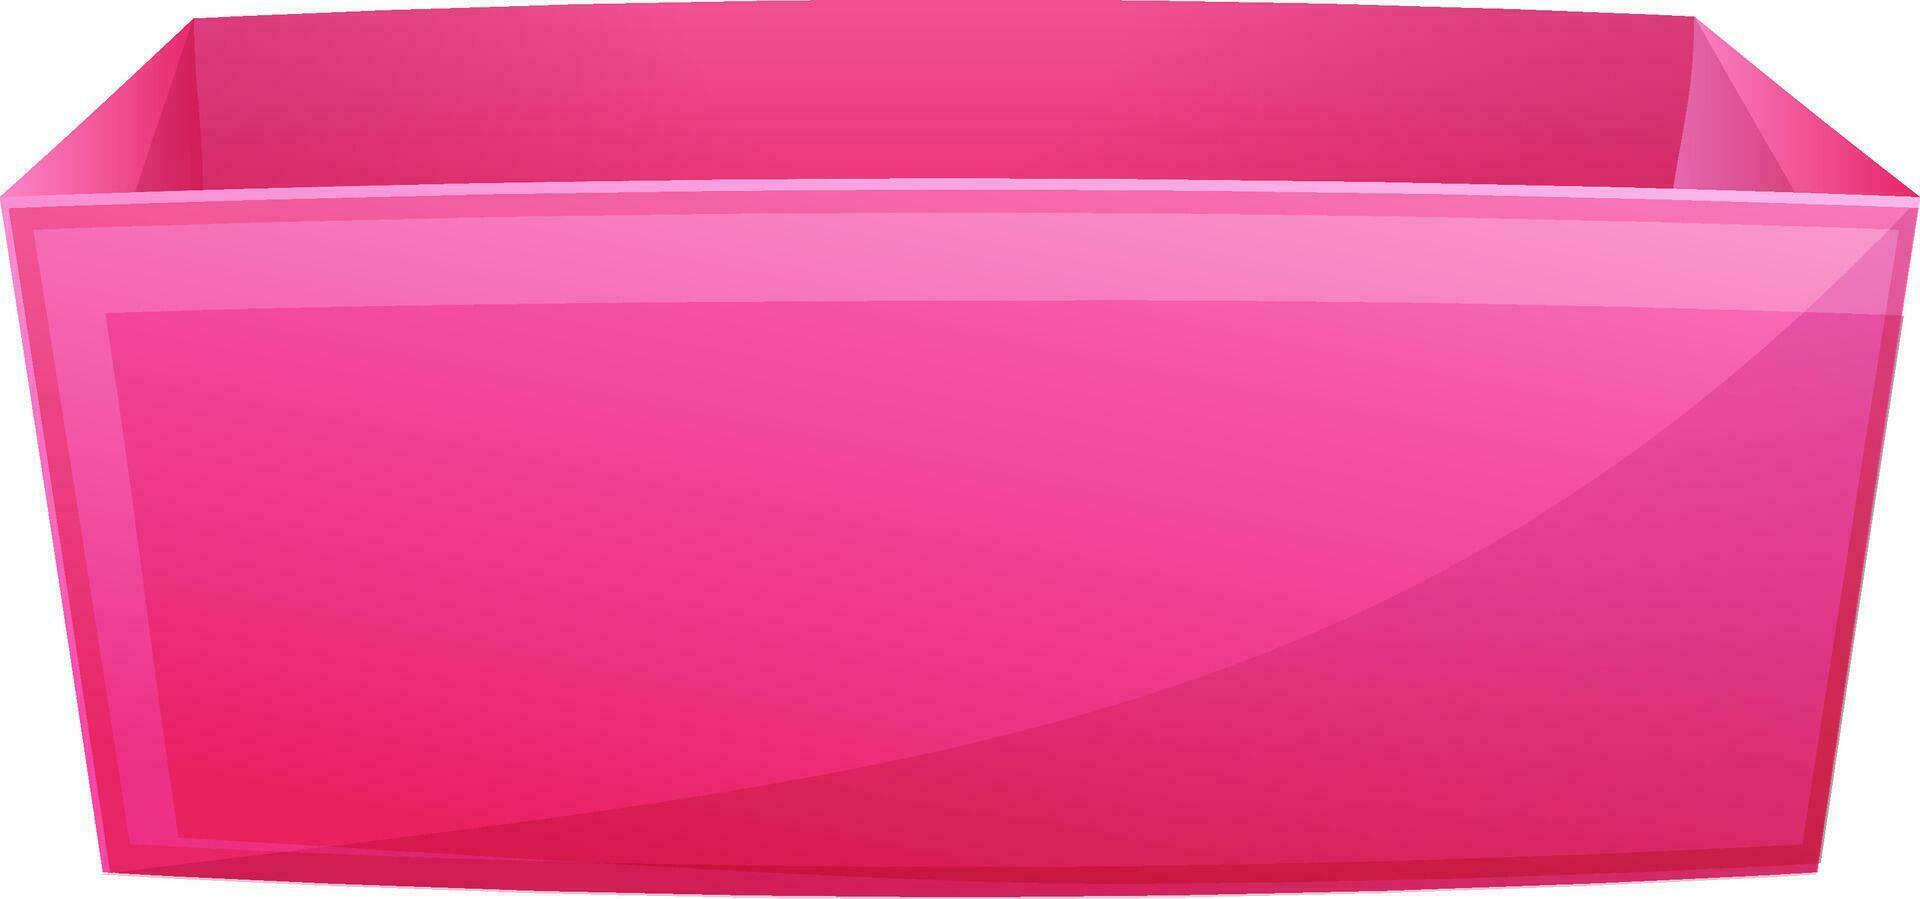 Illustration of pink open box. vector